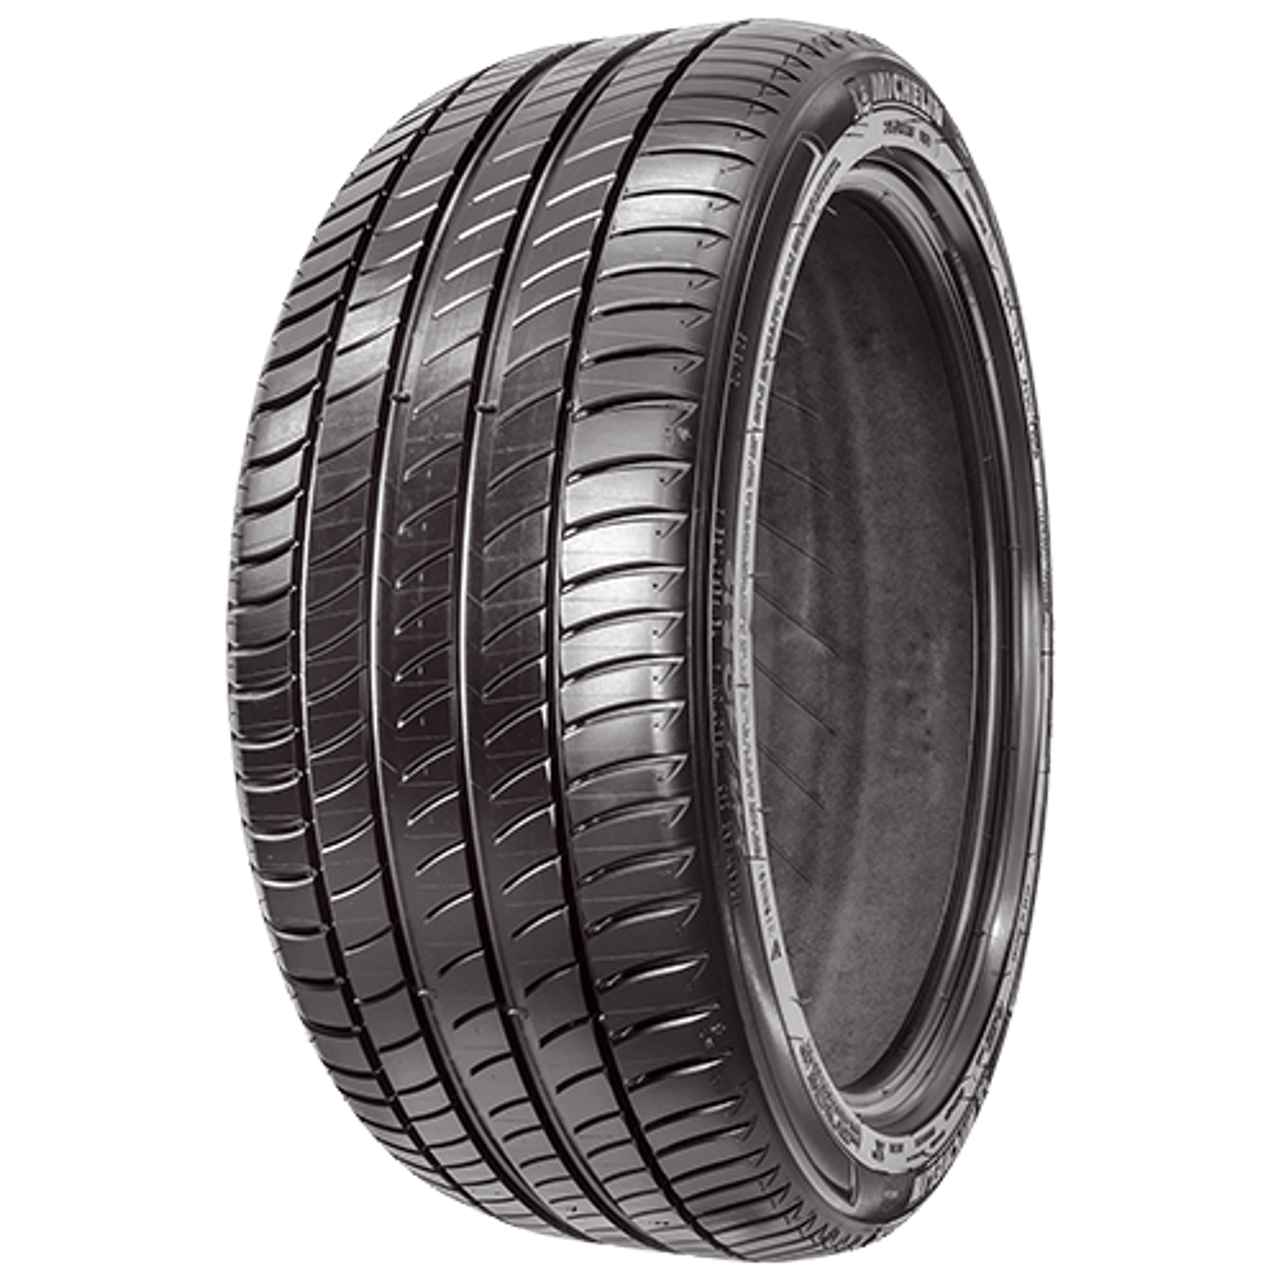 MICHELIN PRIMACY 3 ST 215/55R17 94V DT1 BSW